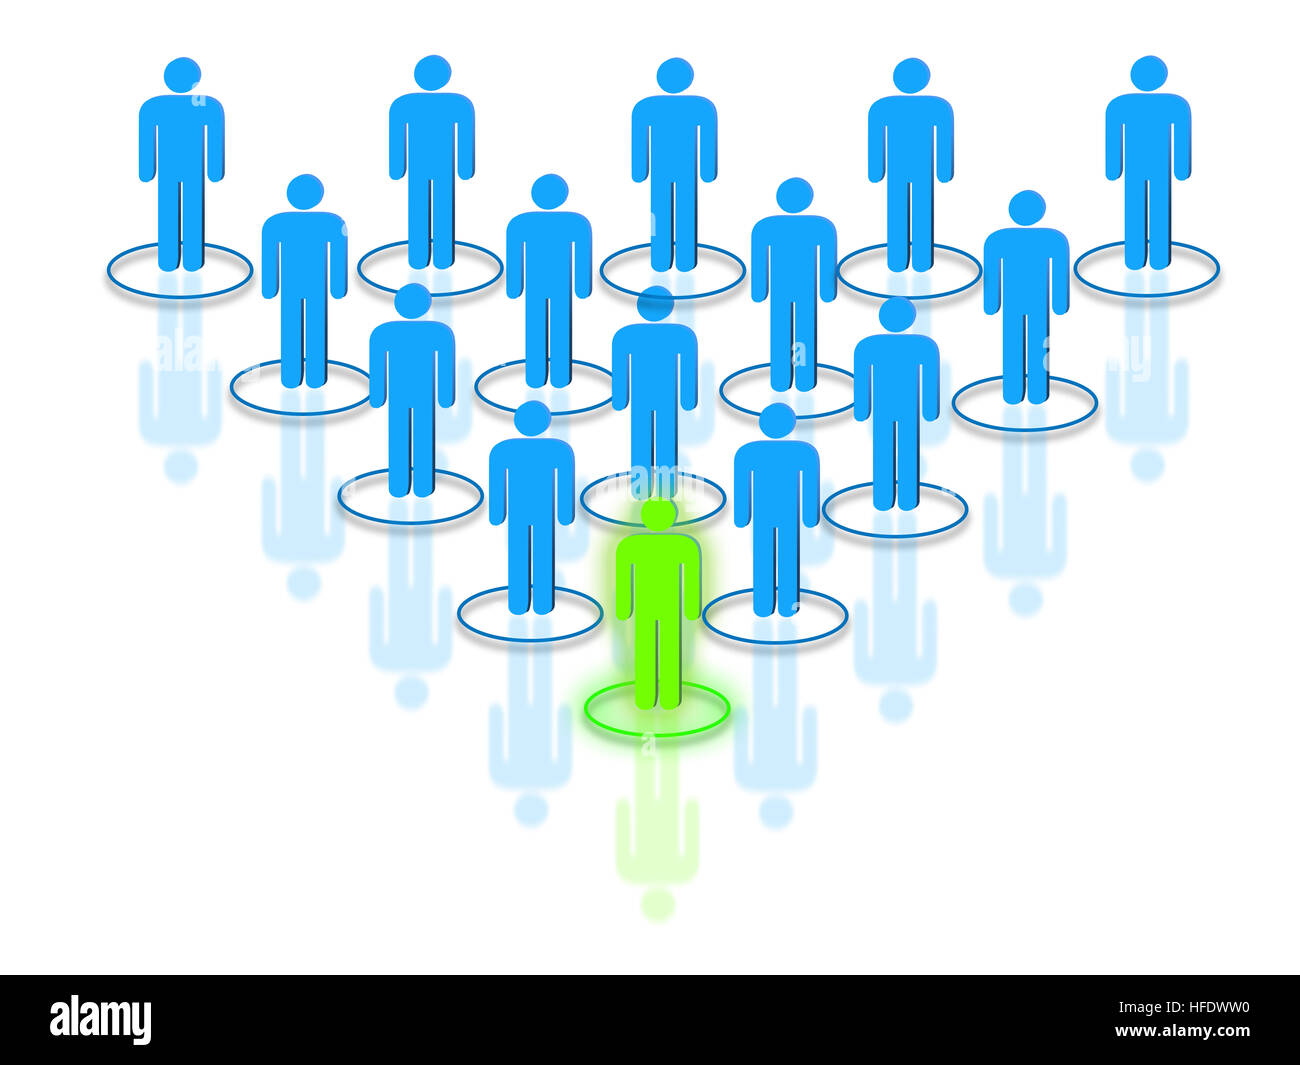 Team leader managing work force concept with interconnected human shaped silhouettes Stock Photo